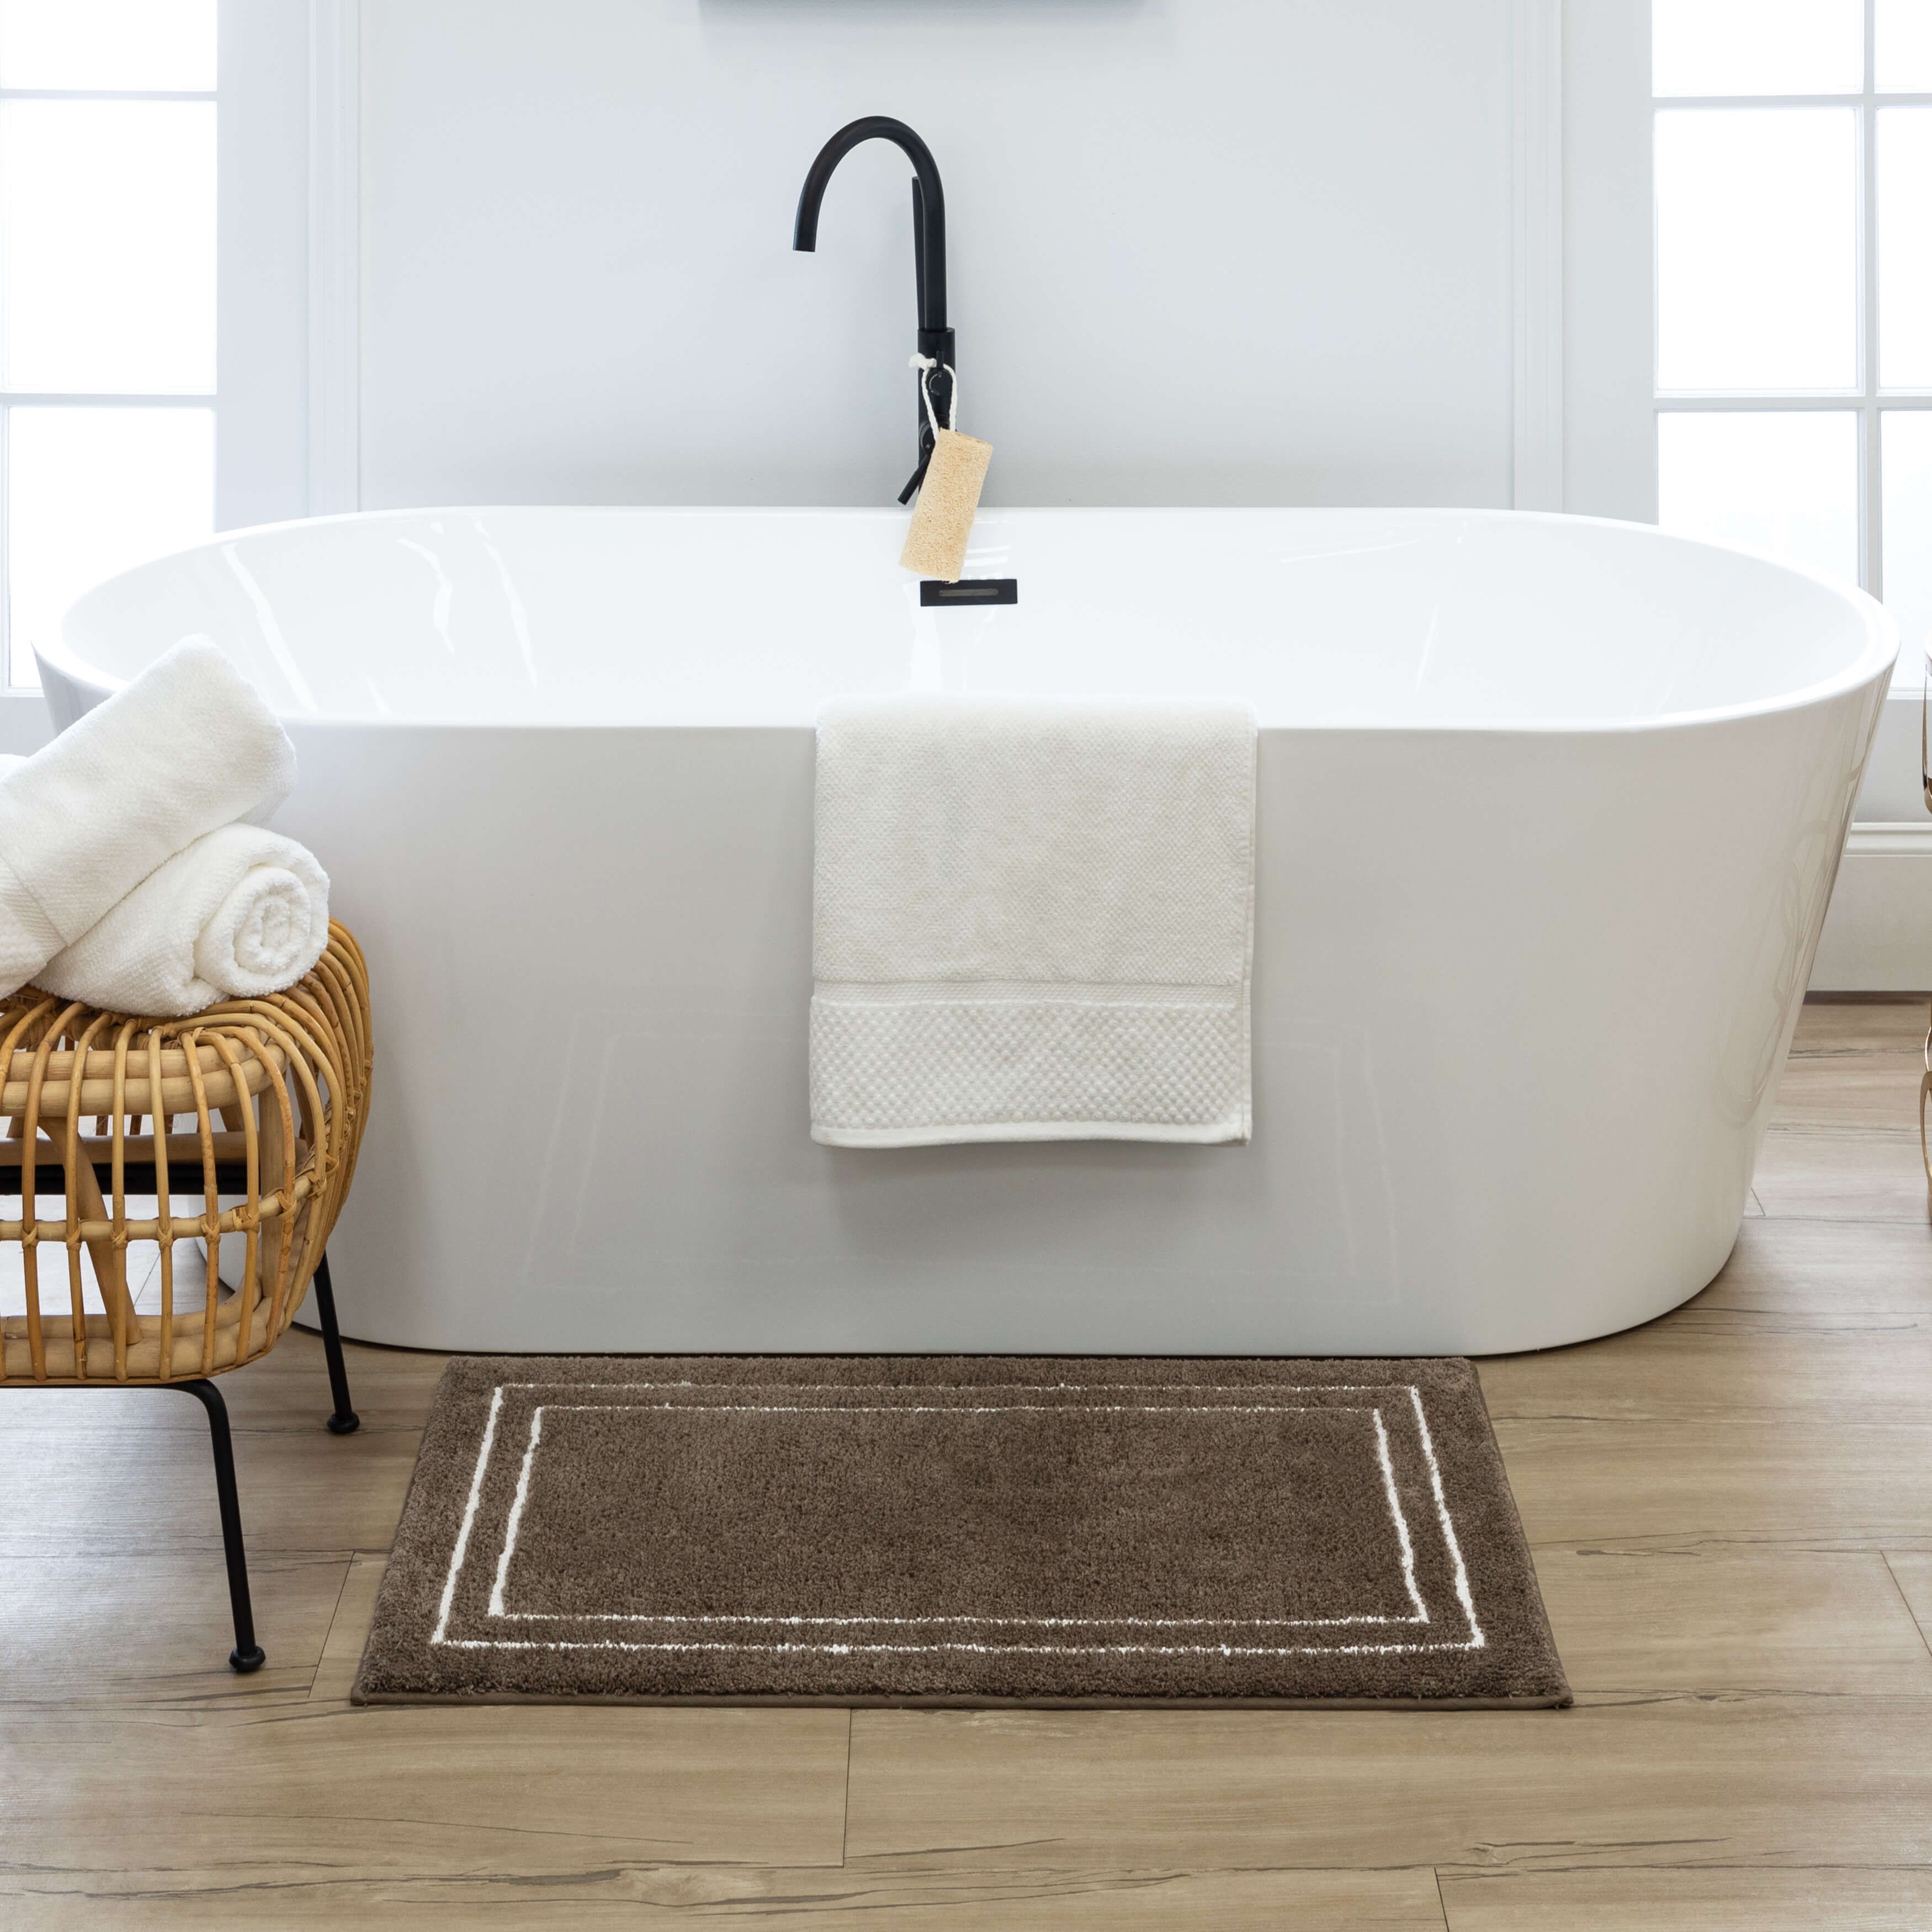 Carrina Walnut and White Bath Mat | Covered By Rugs